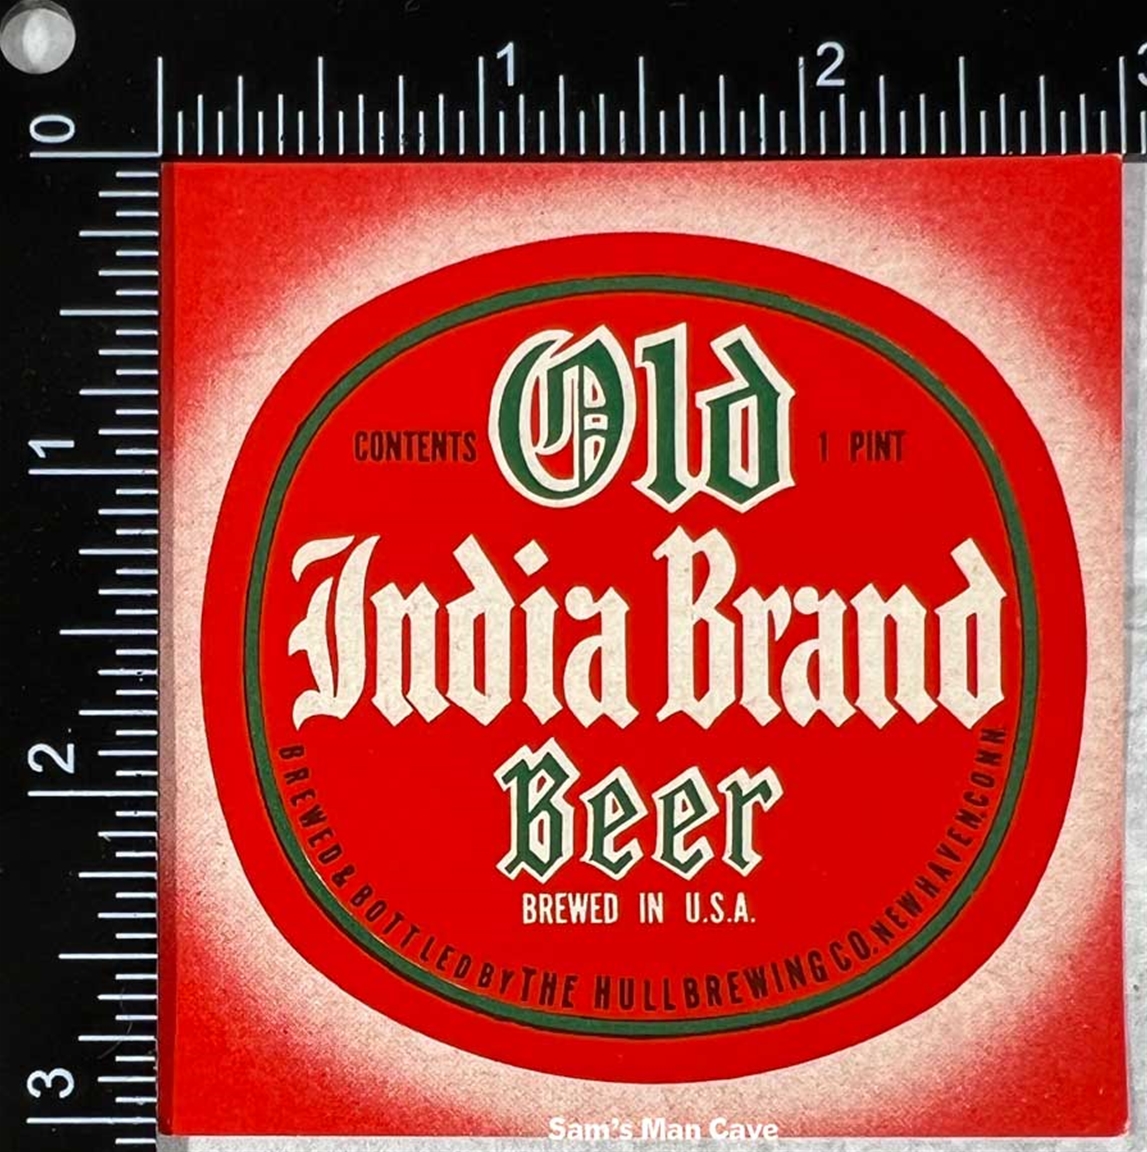 Old India Brand Beer Label